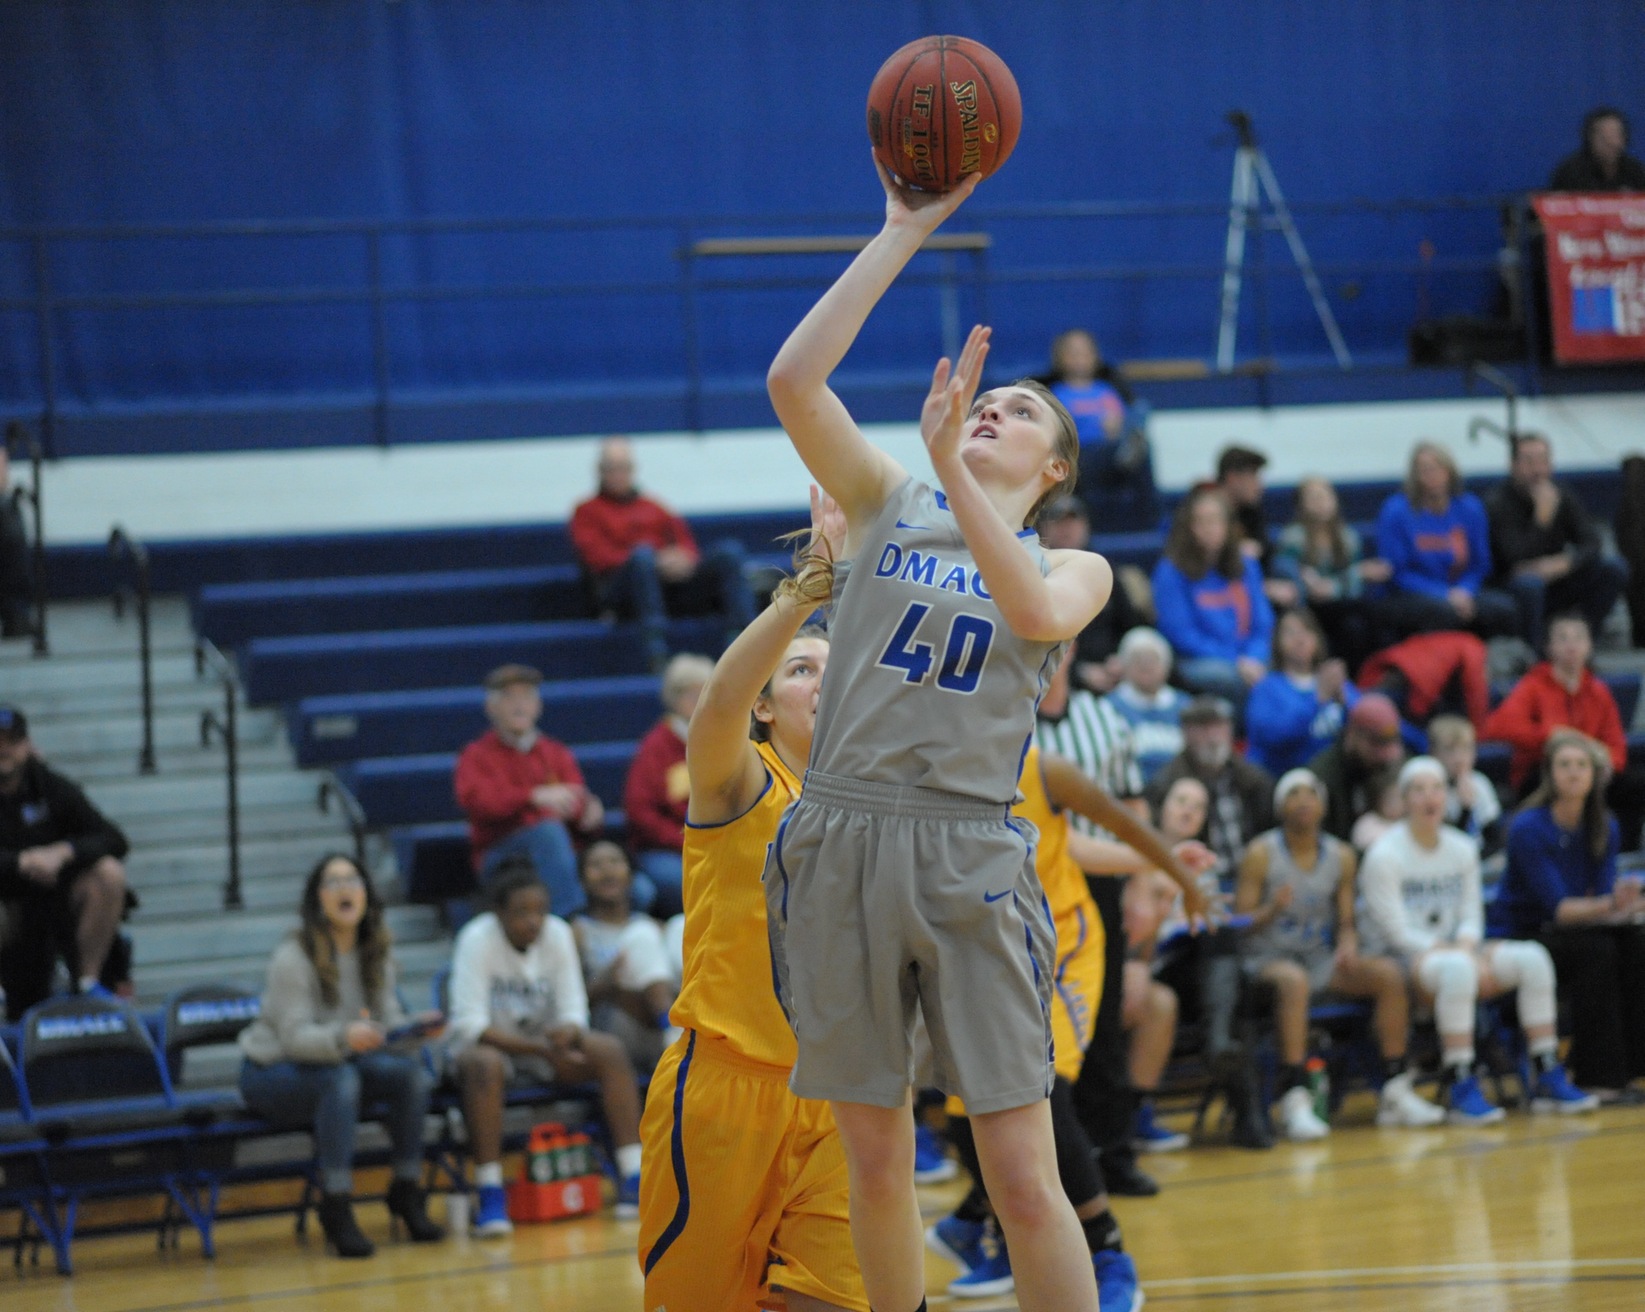 Mitchell's Double-Double Lifts DMACC Women Past SWCC, 71-55